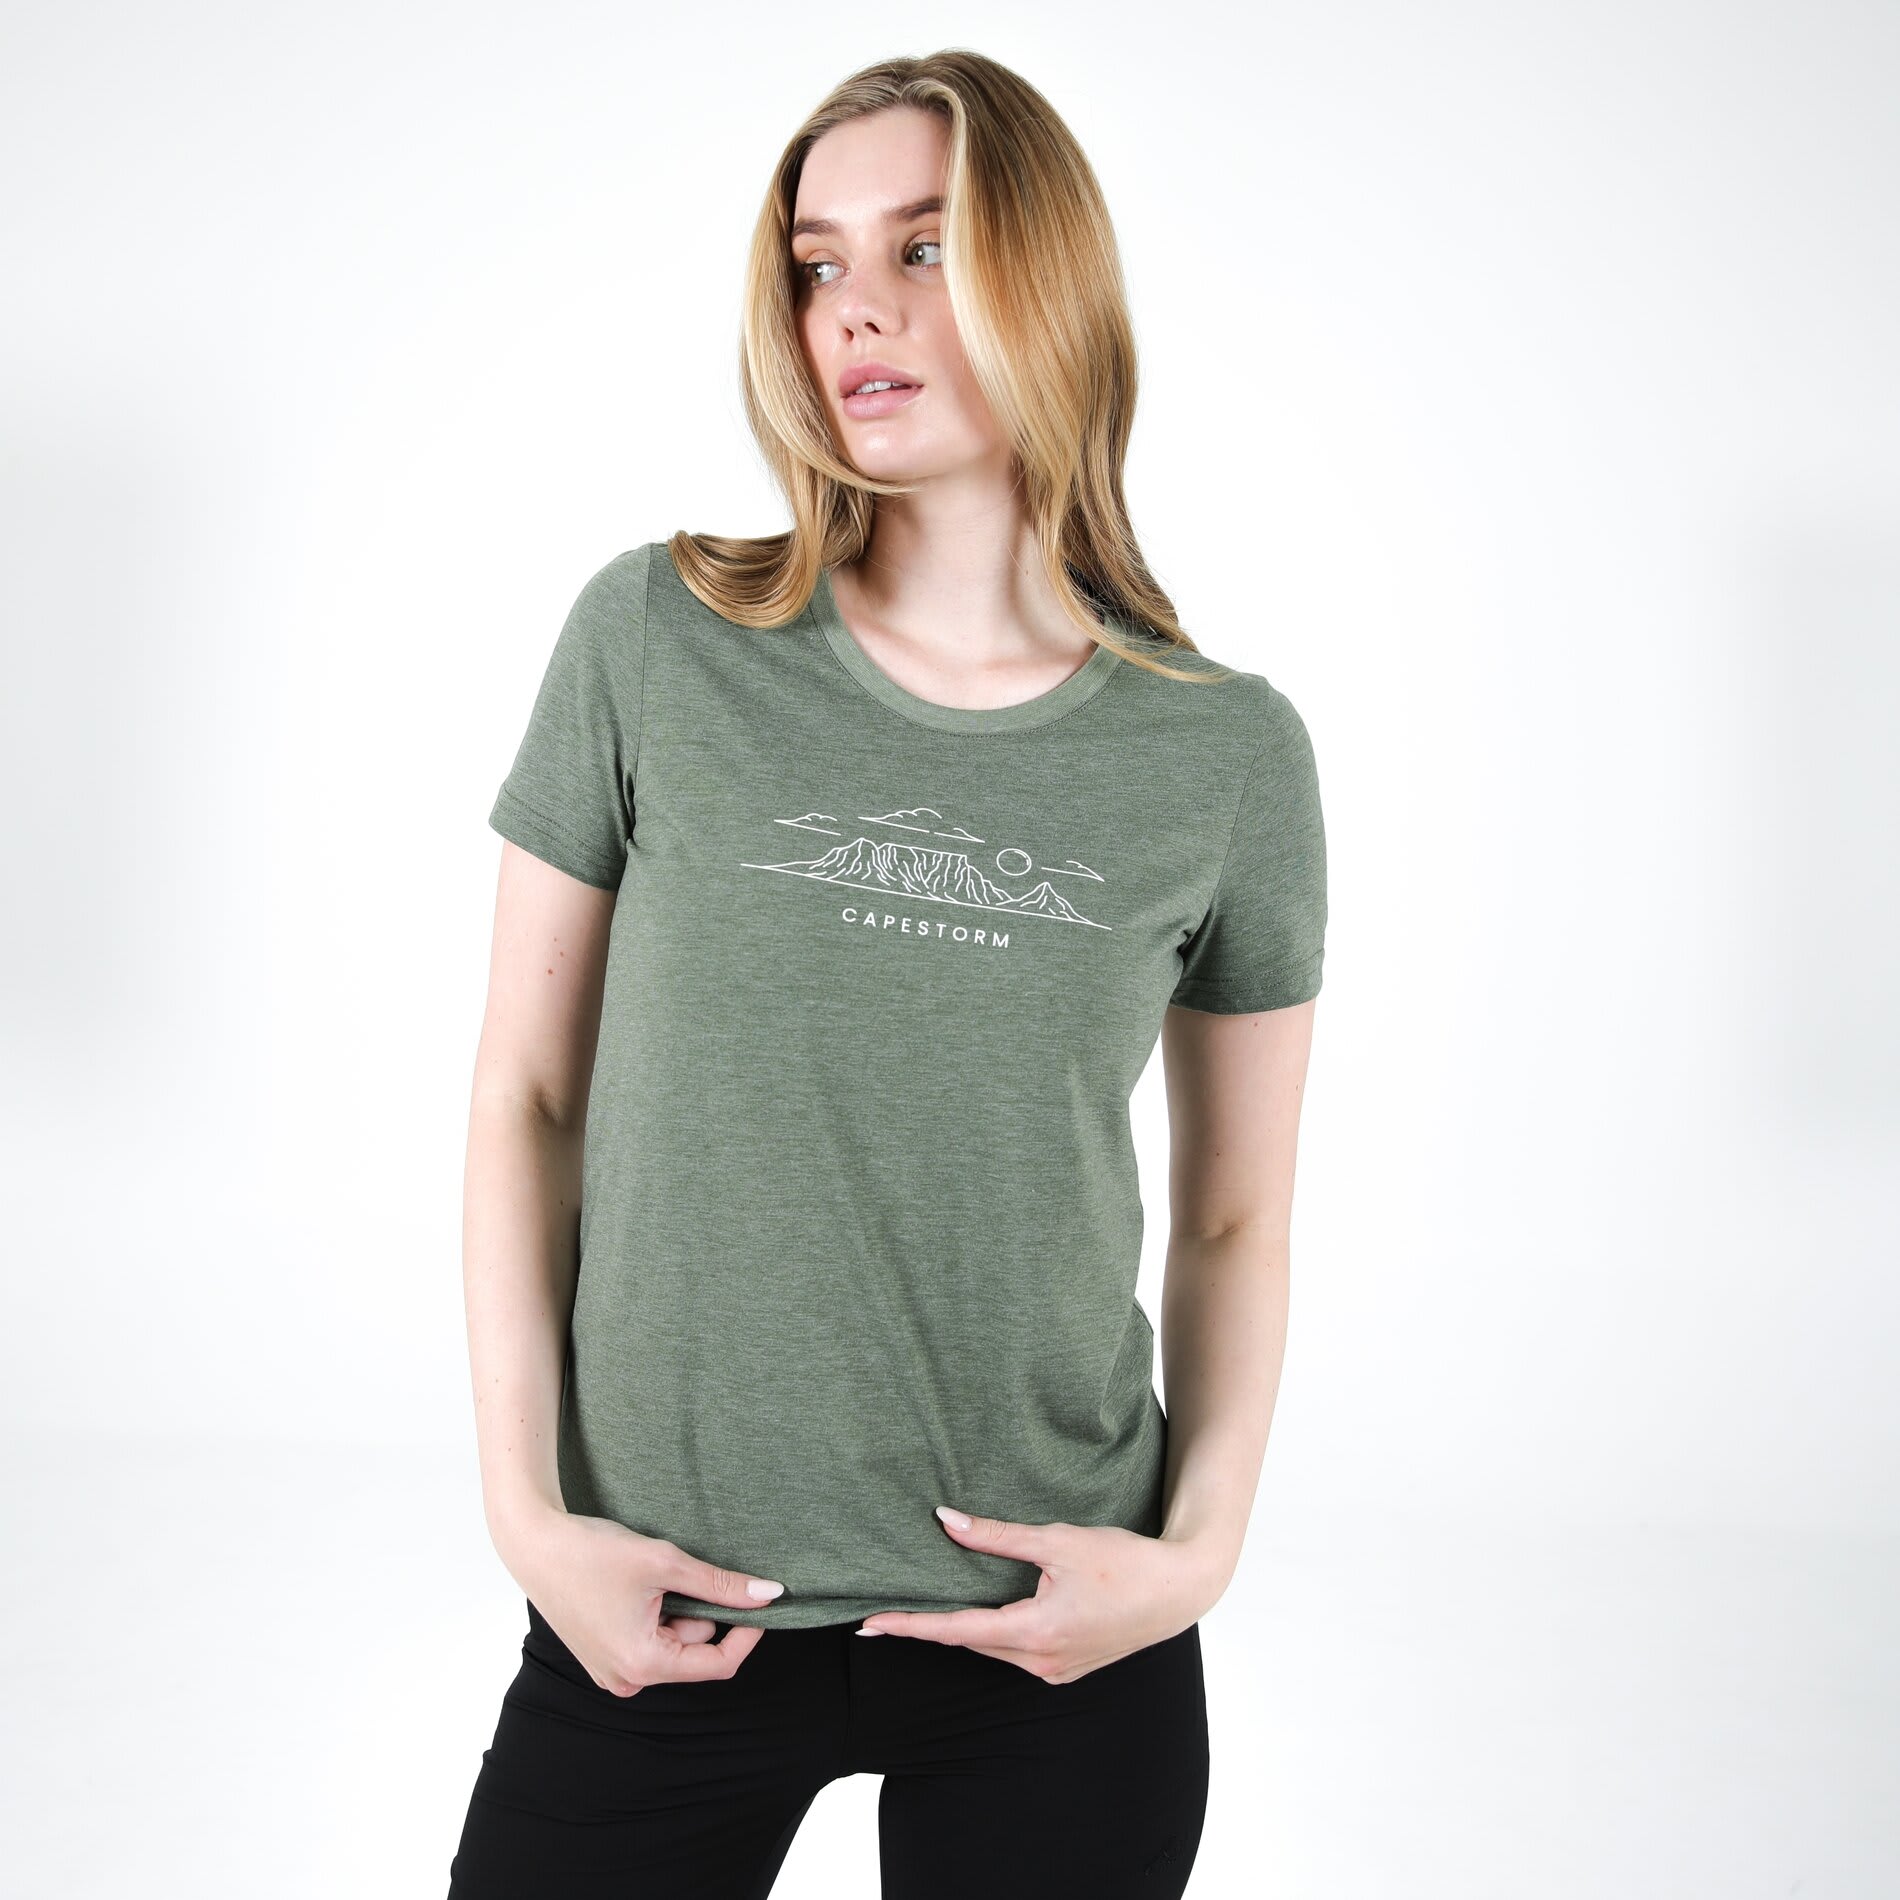 Capestorm Women's Table Mountain Tee | by Capestorm | Price: R 349,9 ...